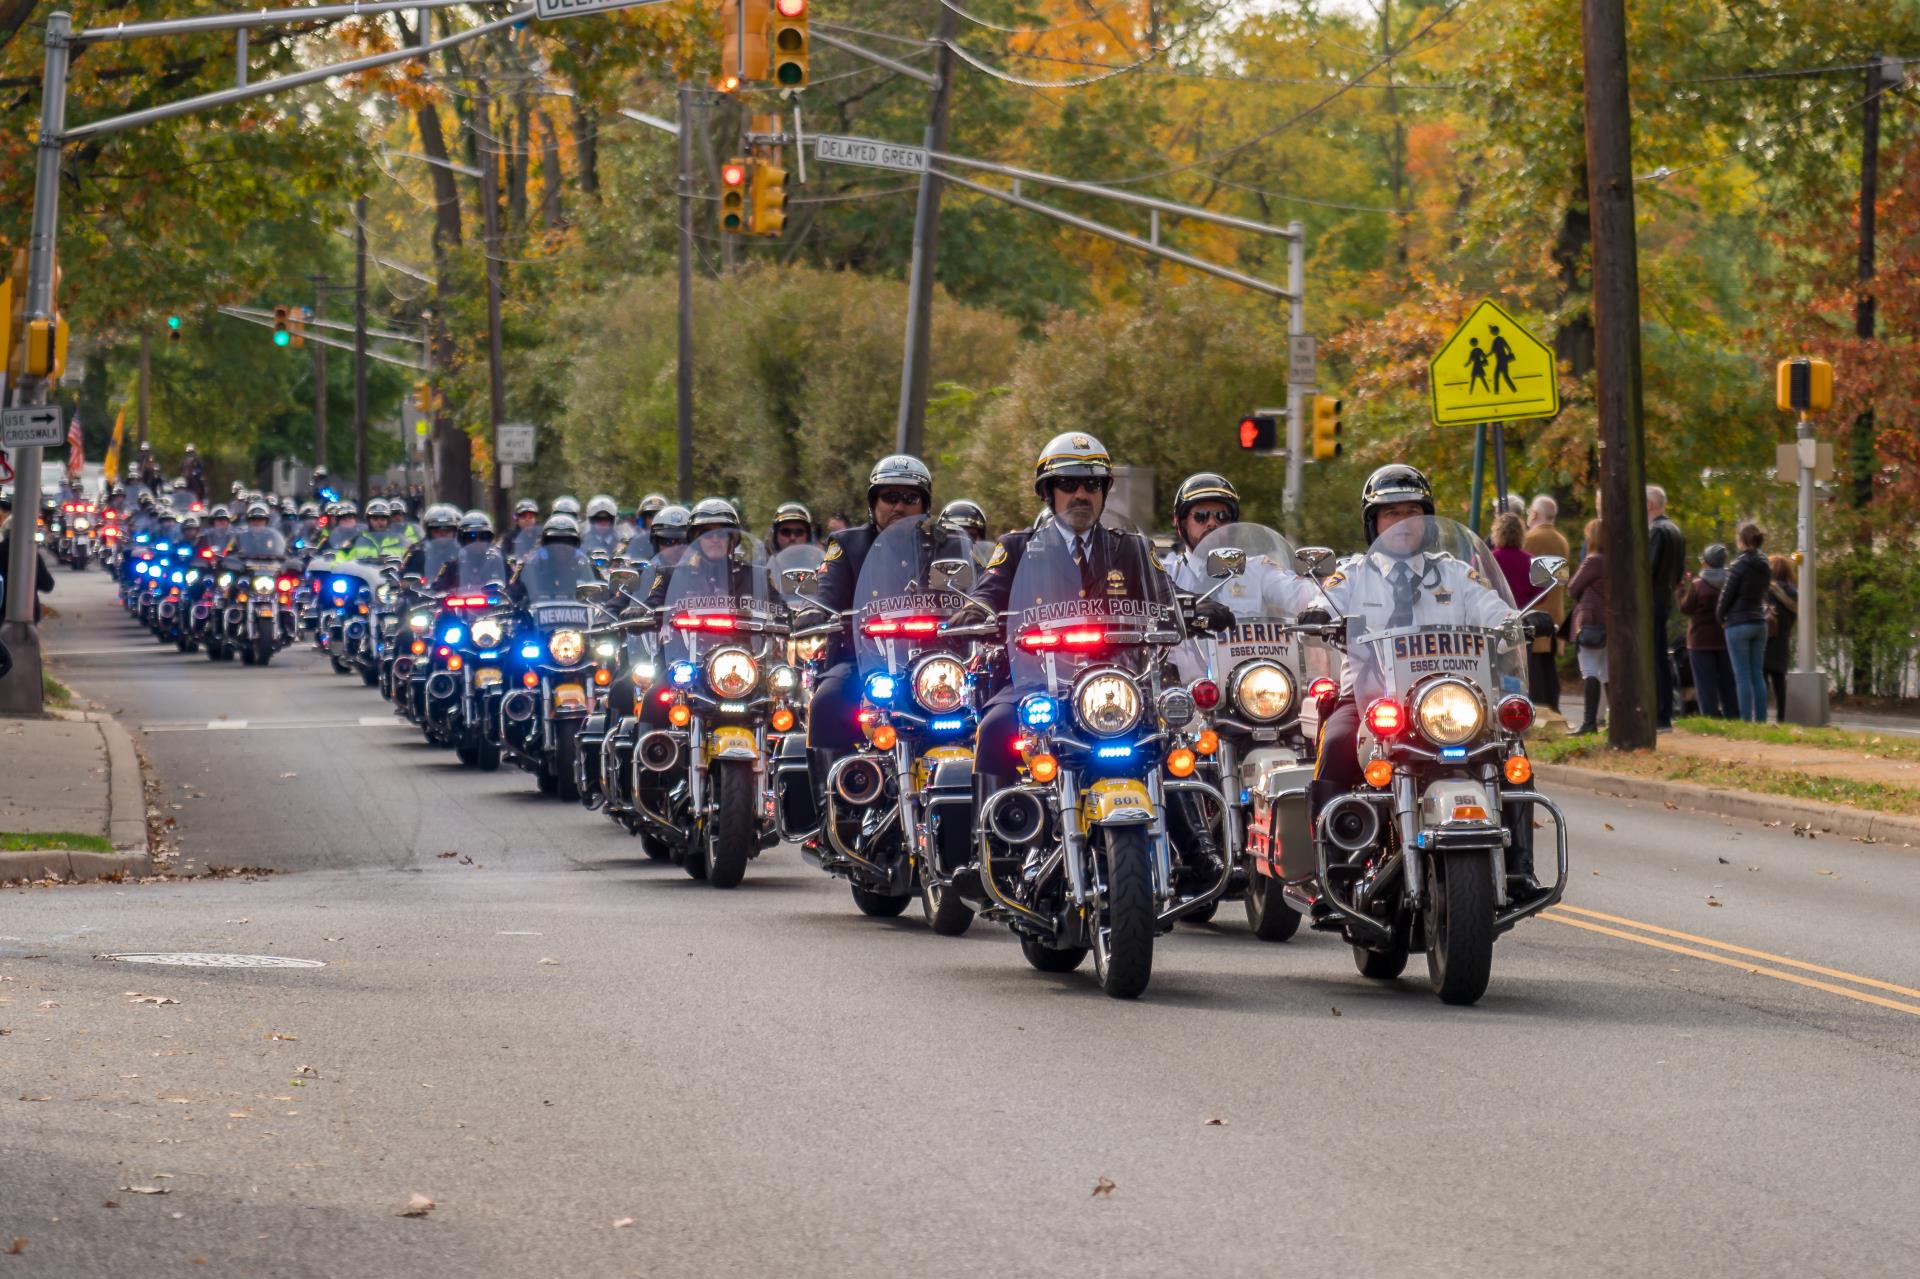 Image of motorcycle procession at Chief DeVaul's funeral.